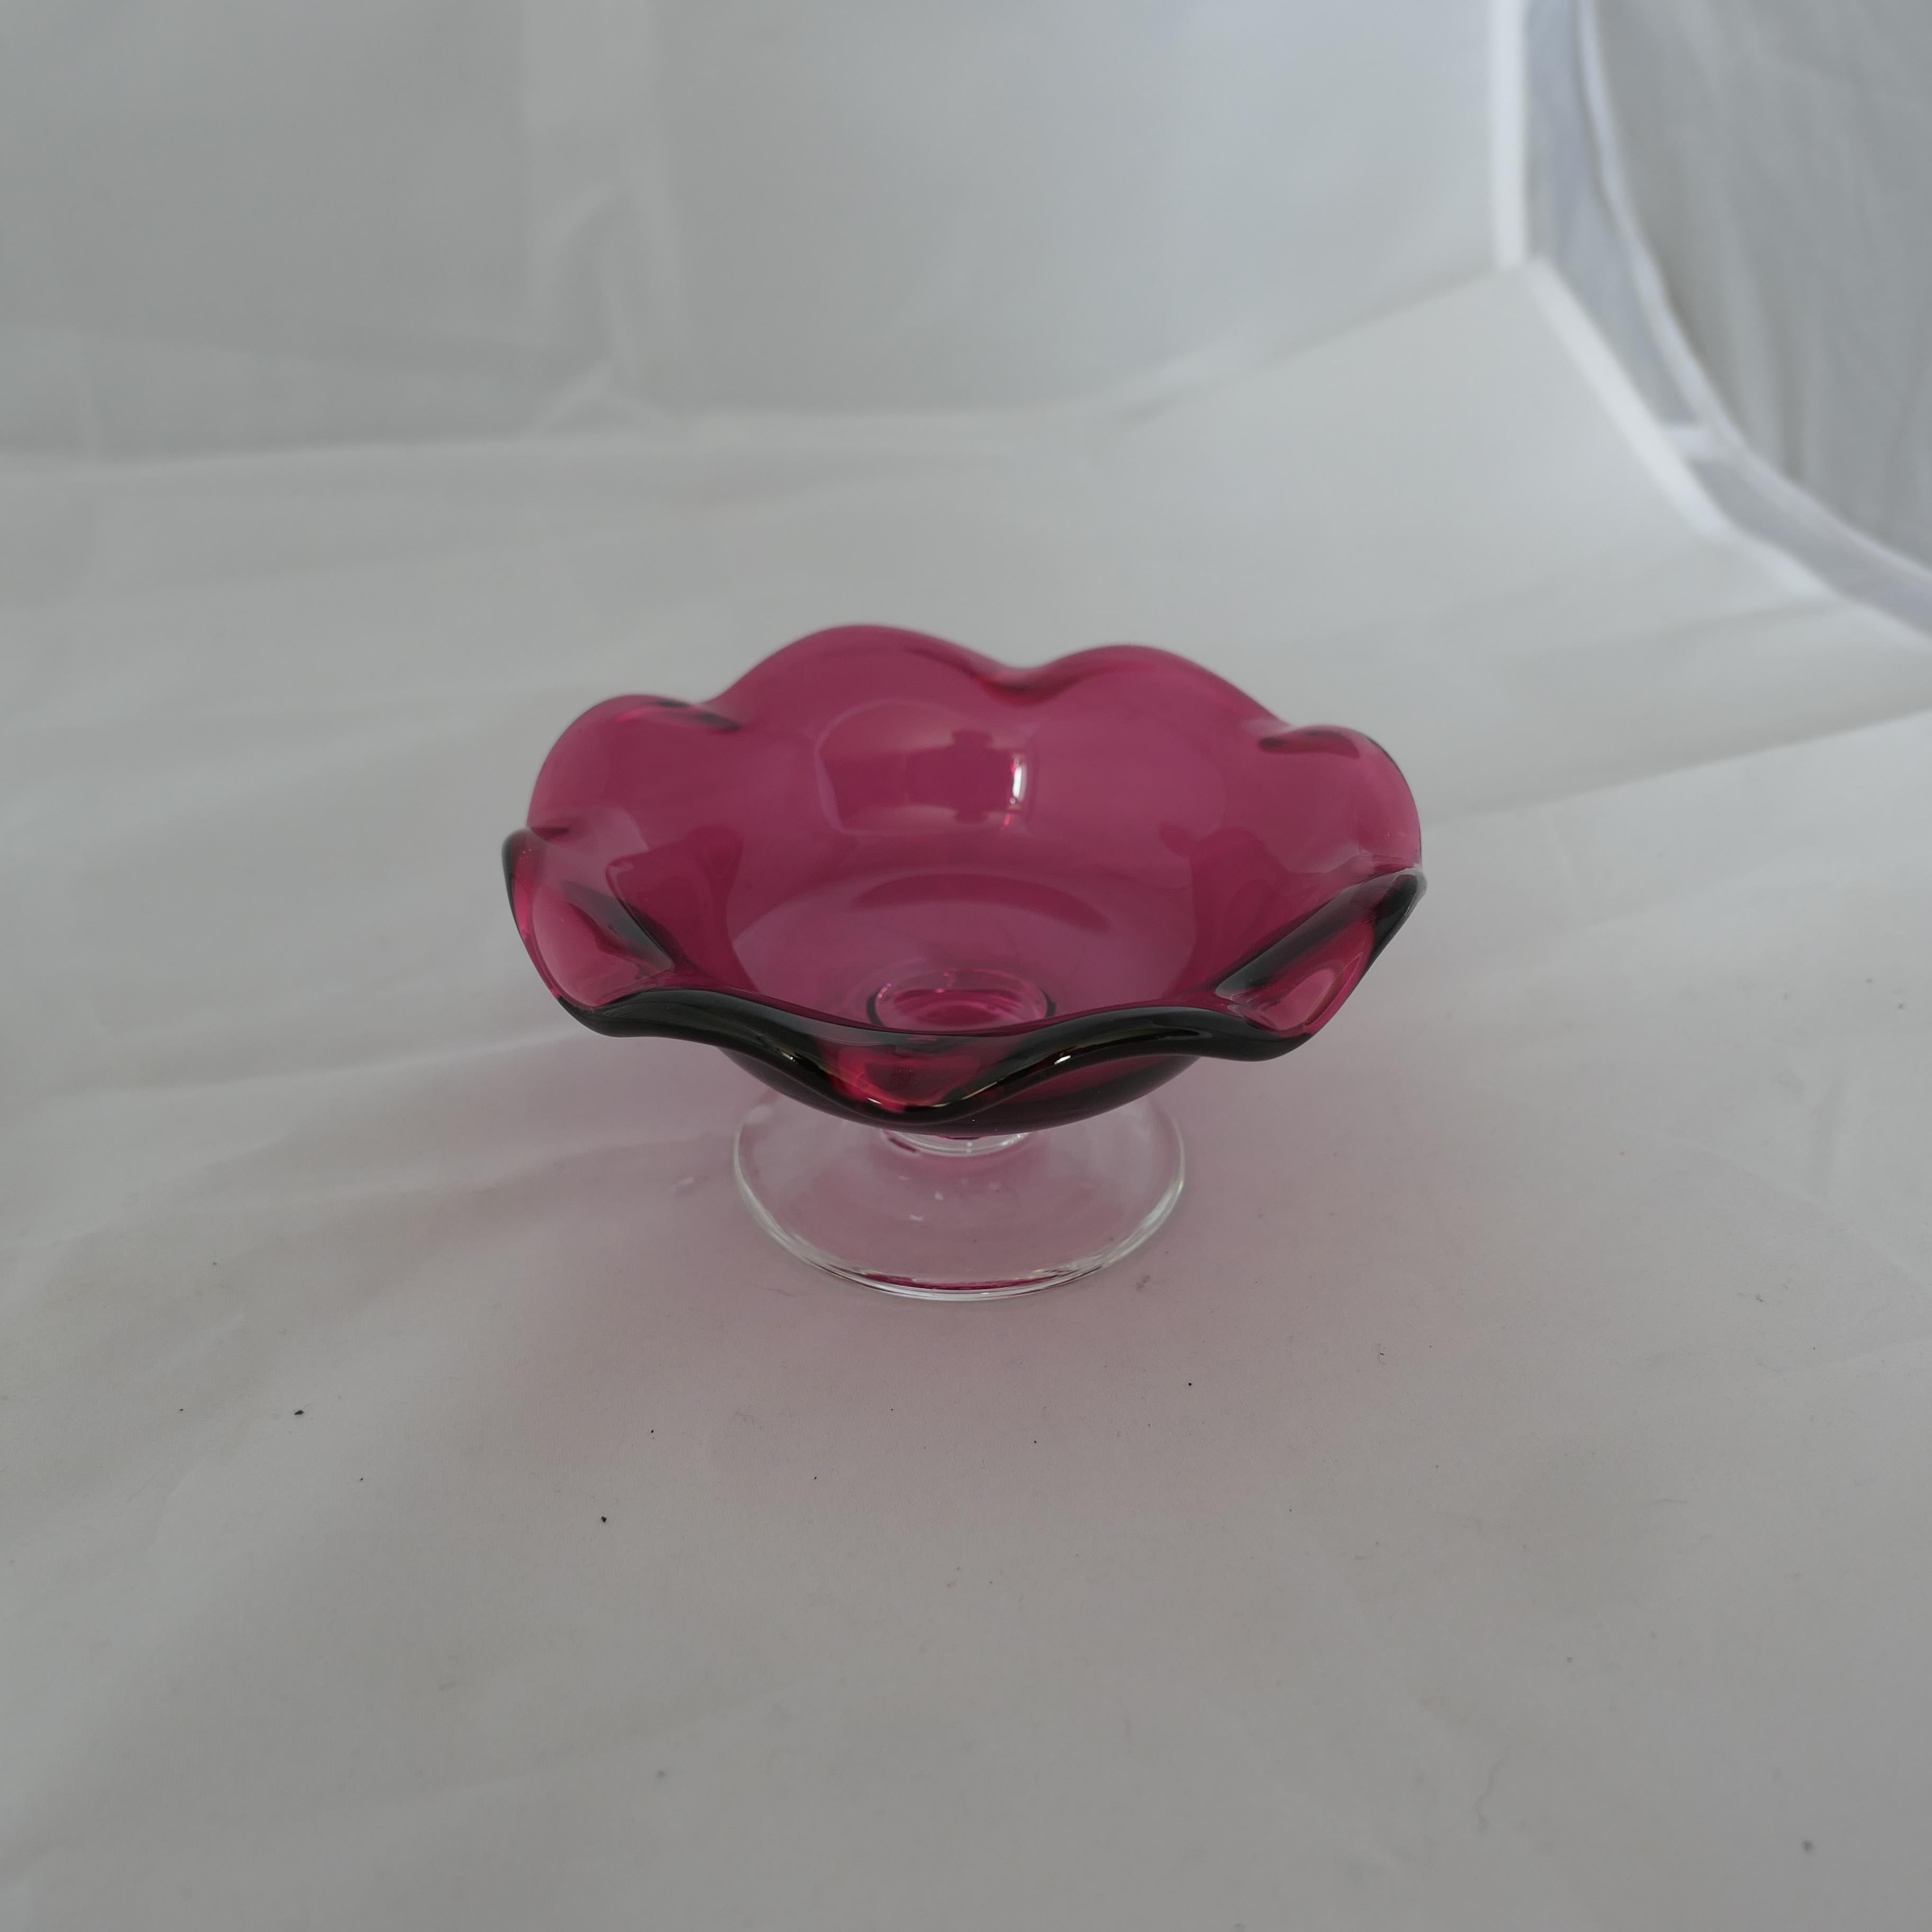 Antique Victorian Cranberry Glass Dish

Antique Victorian Cranberry Glass Dish with clear base
Good Condition. 
2.5” high and 5” in diameter
FB204